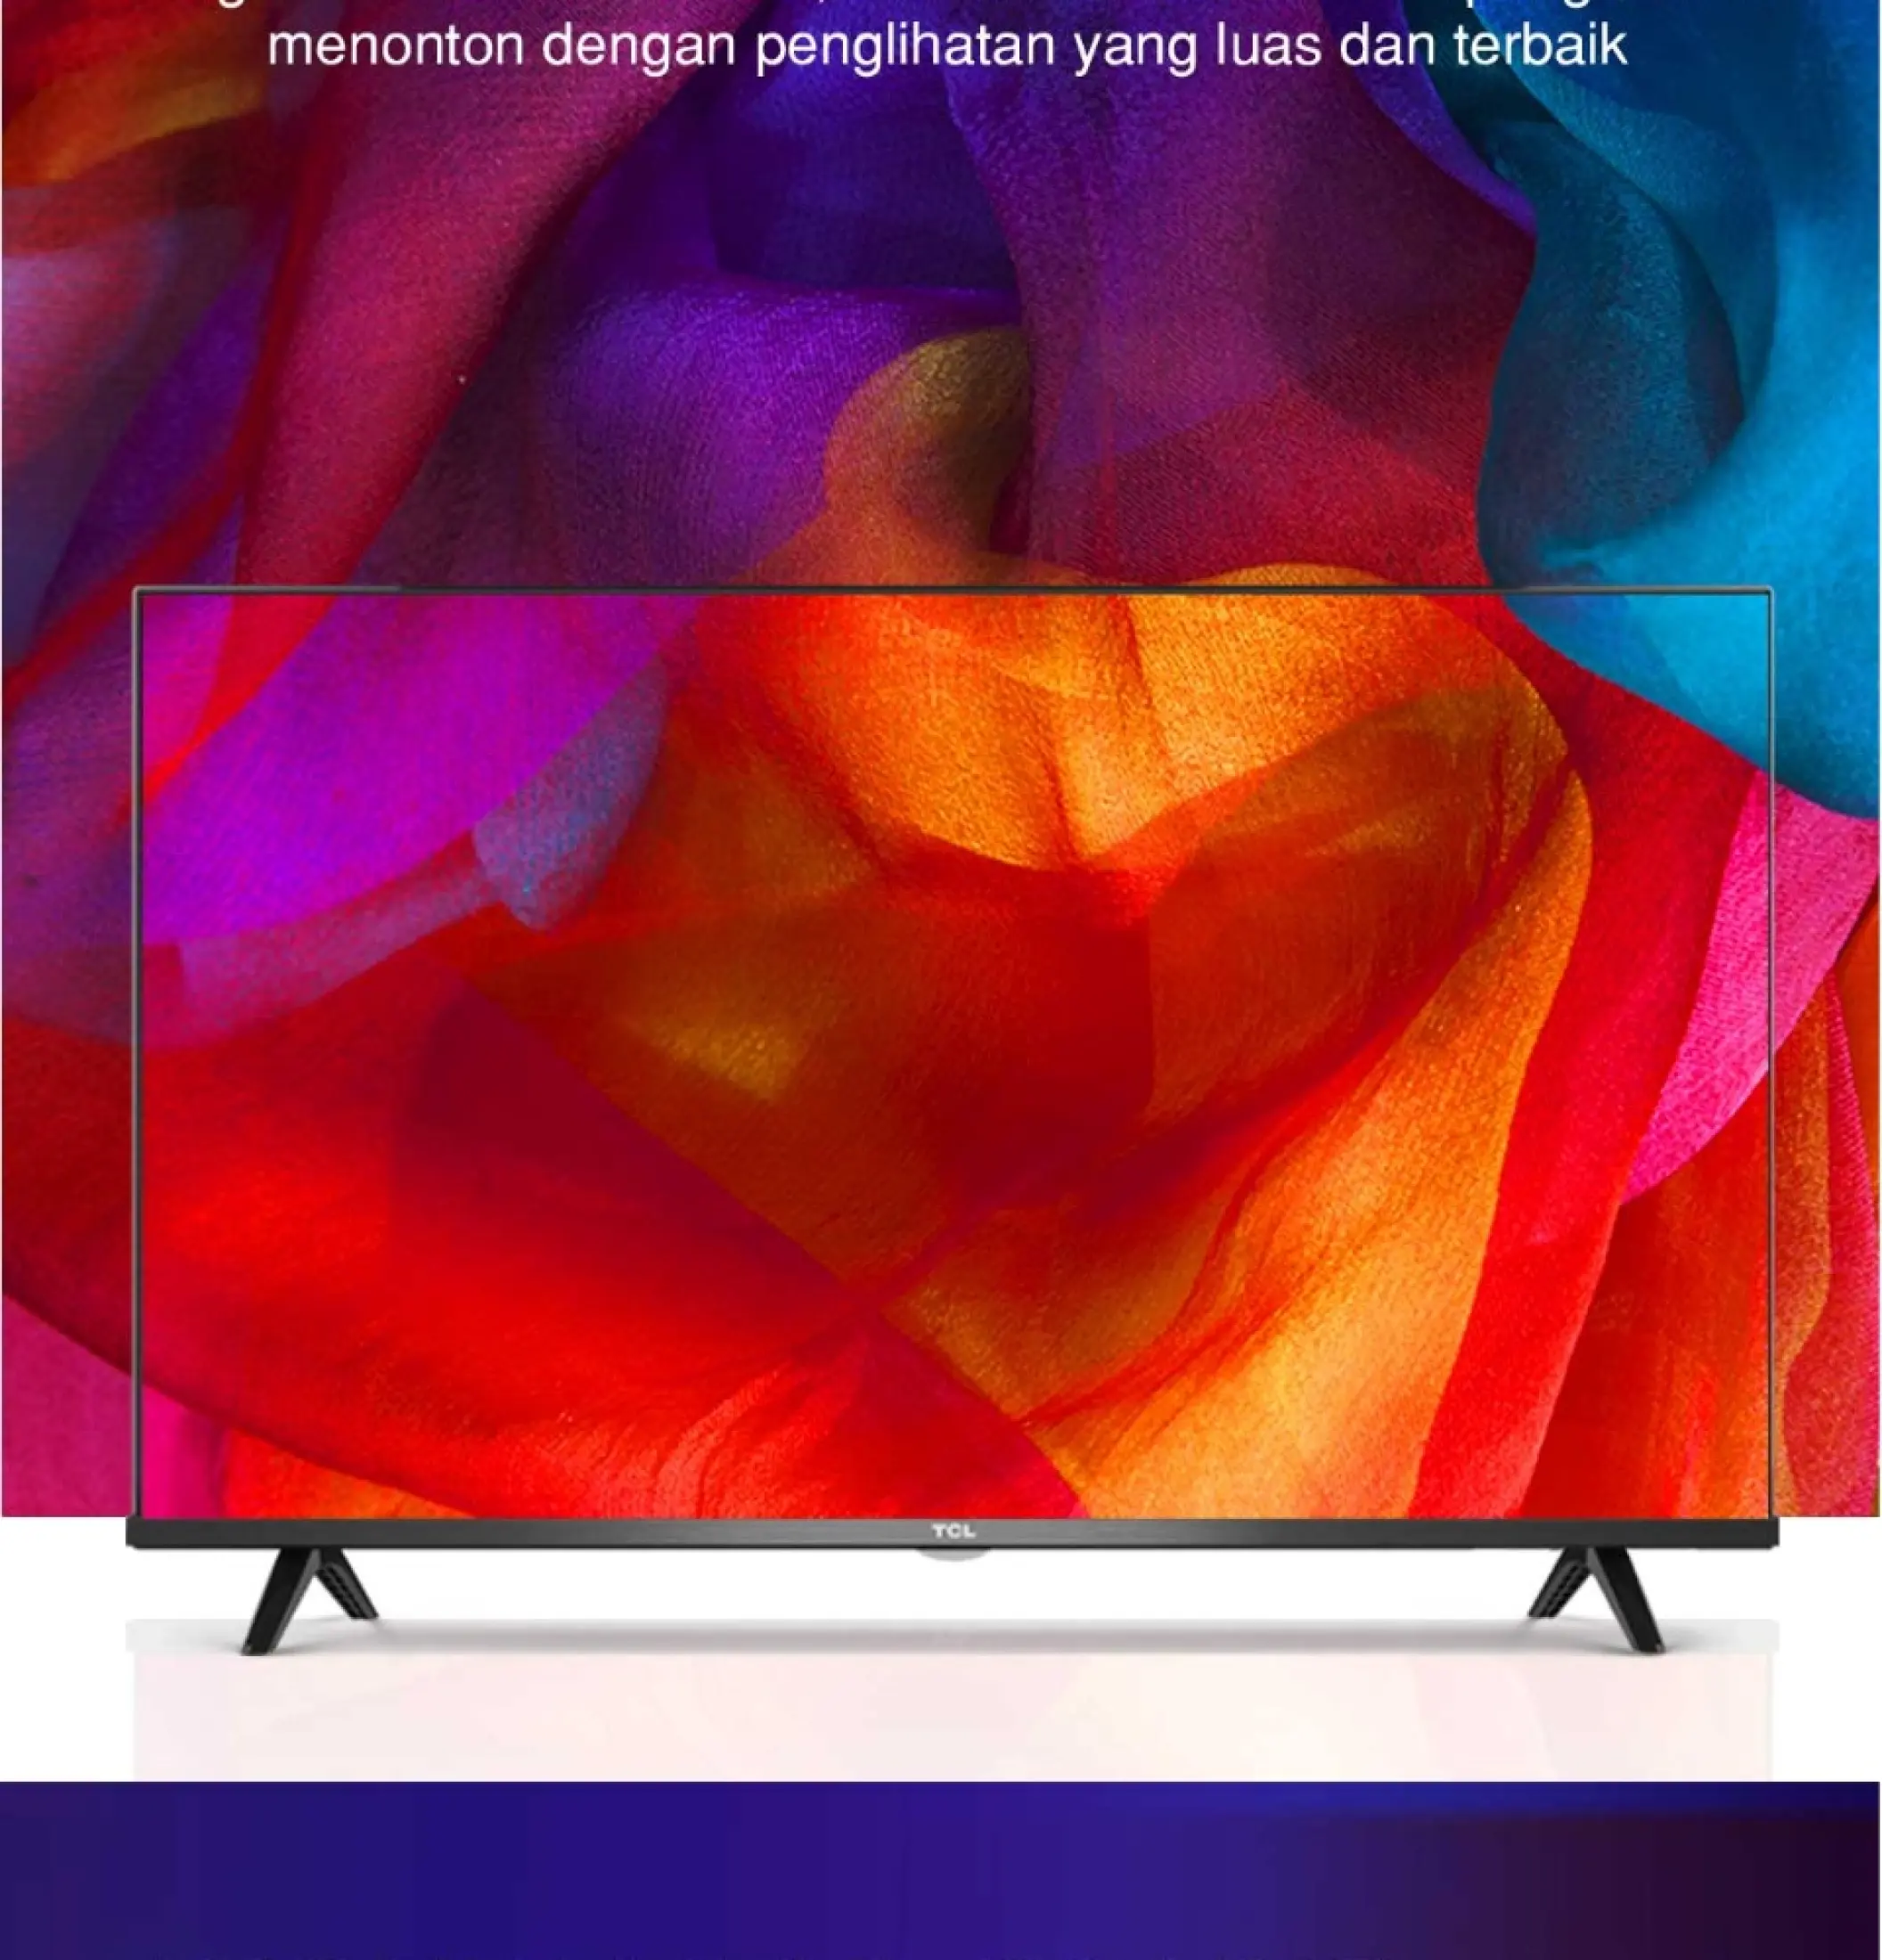 Tcl 40 Inch Smart Led Tv Android 9 0 Frameless Full Hd Google Voice Netflix Youtube Wifi Hdmi Usb Bluetooth Dolby Sound Model 40a5 Lazada Indonesia